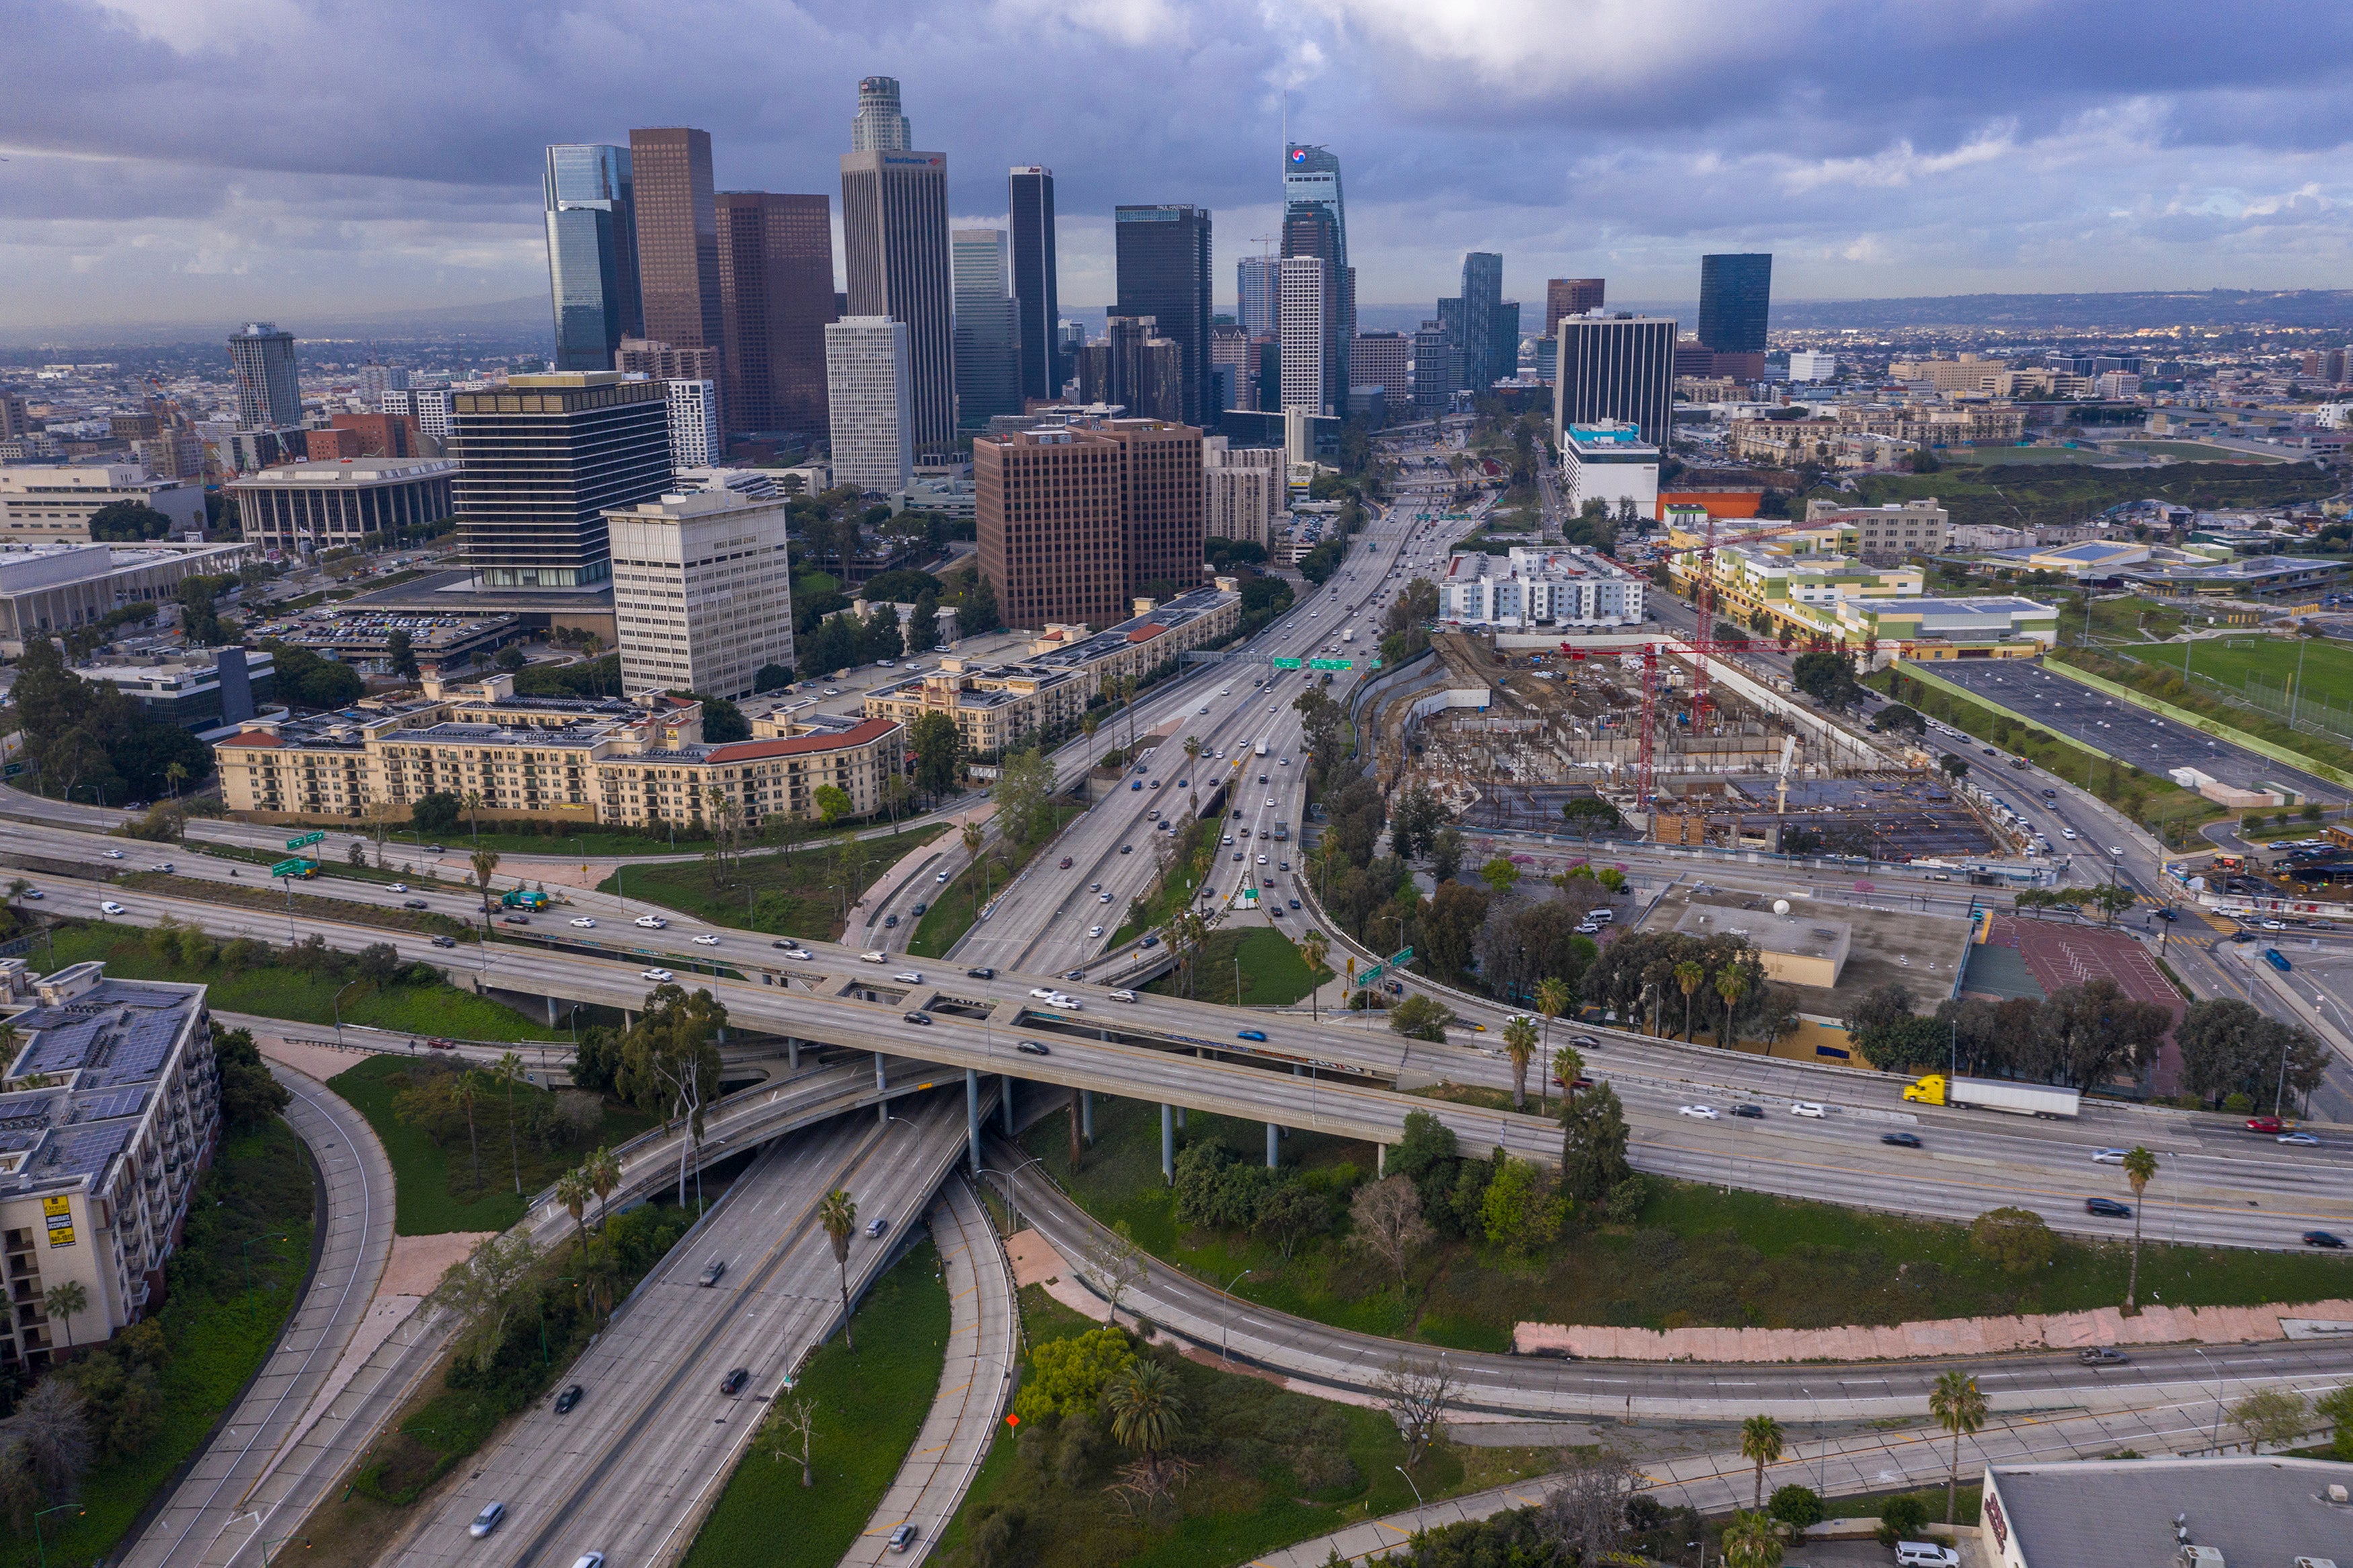 Freeway traffic on the 110 and 101 March 19, 2020 in Los Angeles, California.